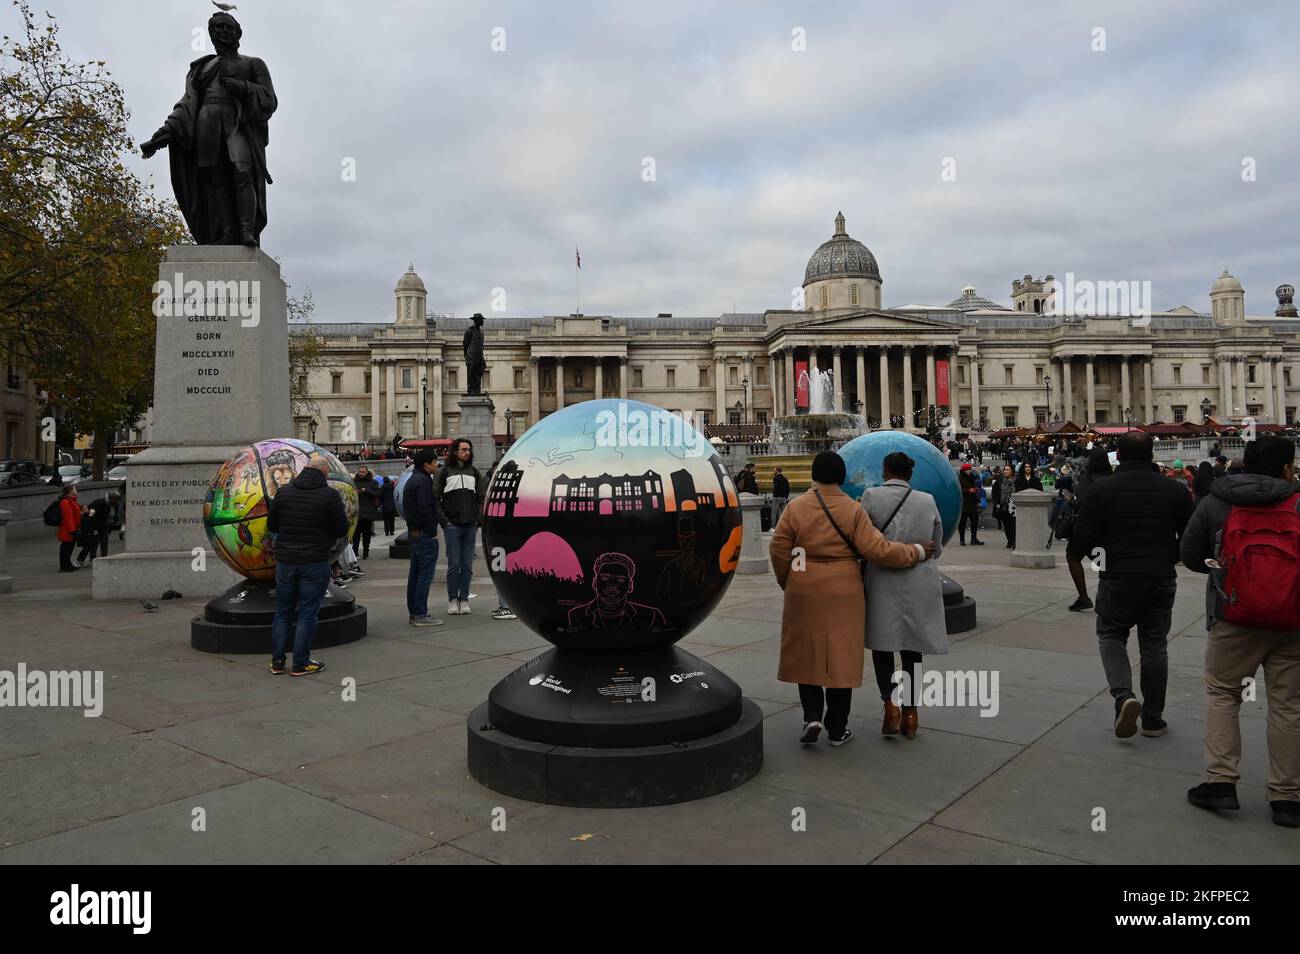 London, UK. 19th Nov 2022. Black history - The World Reimagined, globes in Trafalgar Square, about the Transatlantic Trade in Enslaved Africans. Stock Photo